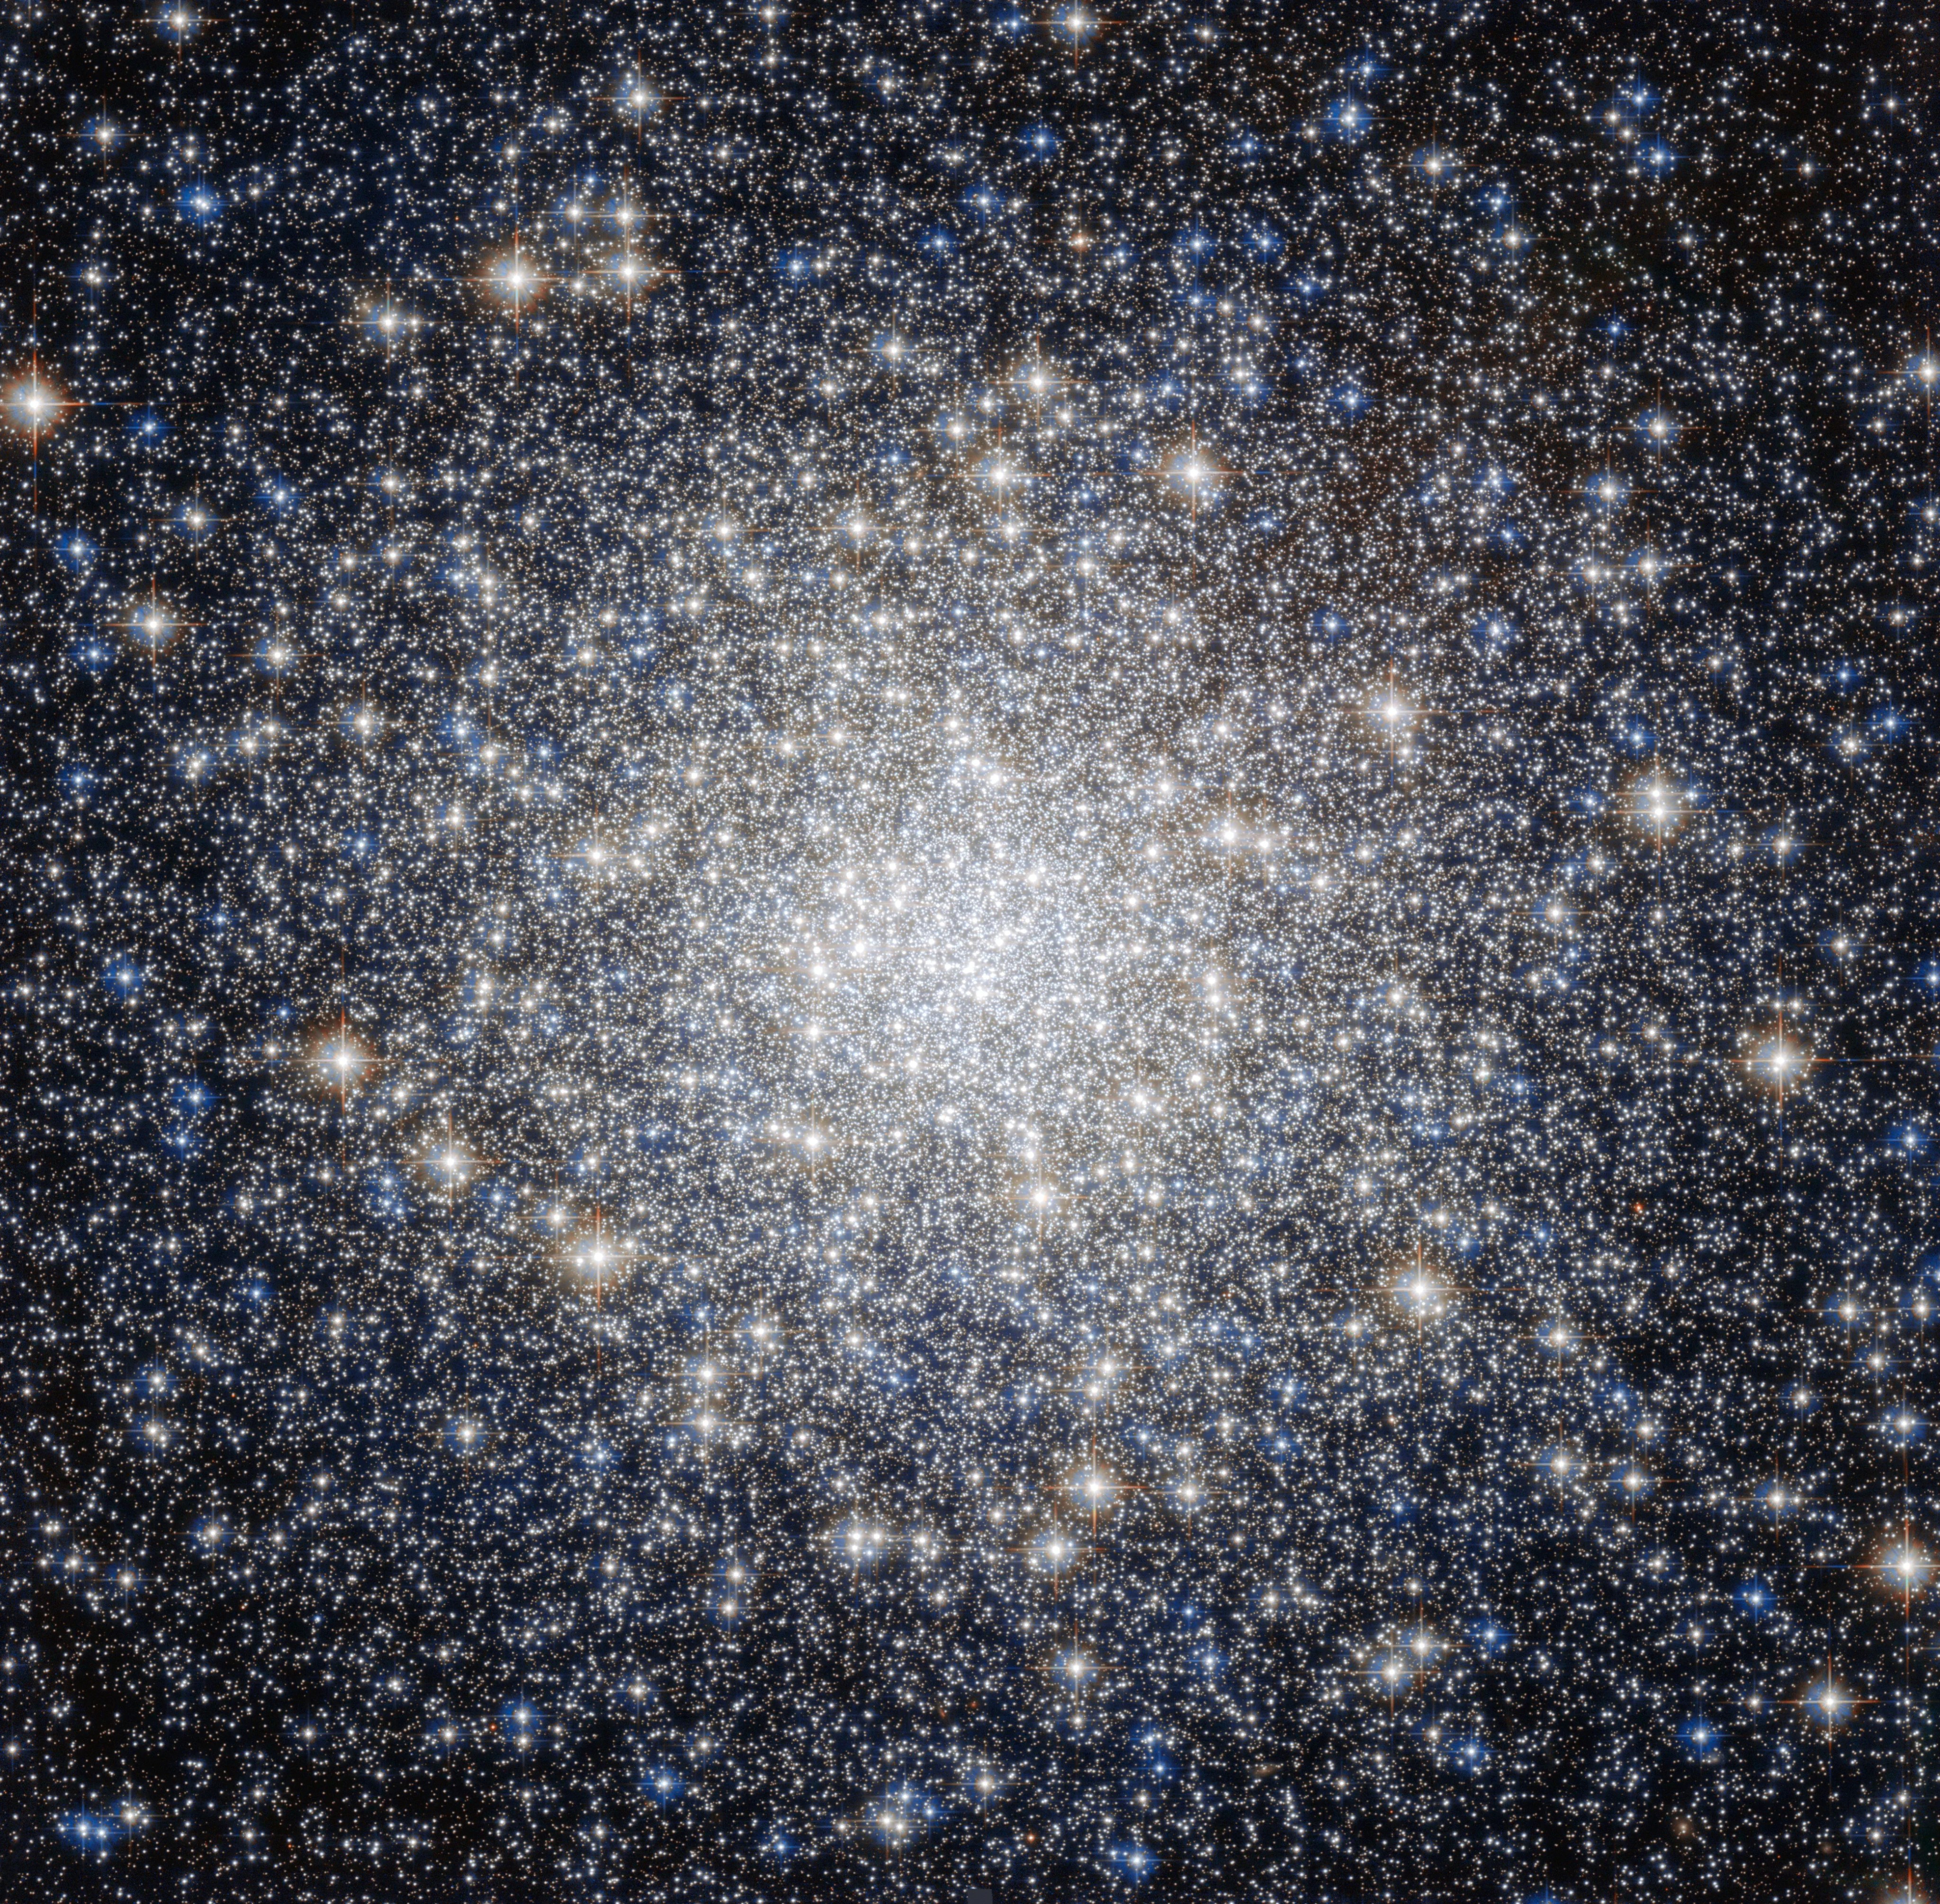 A bright cluster of stars, more concentrated at the center.